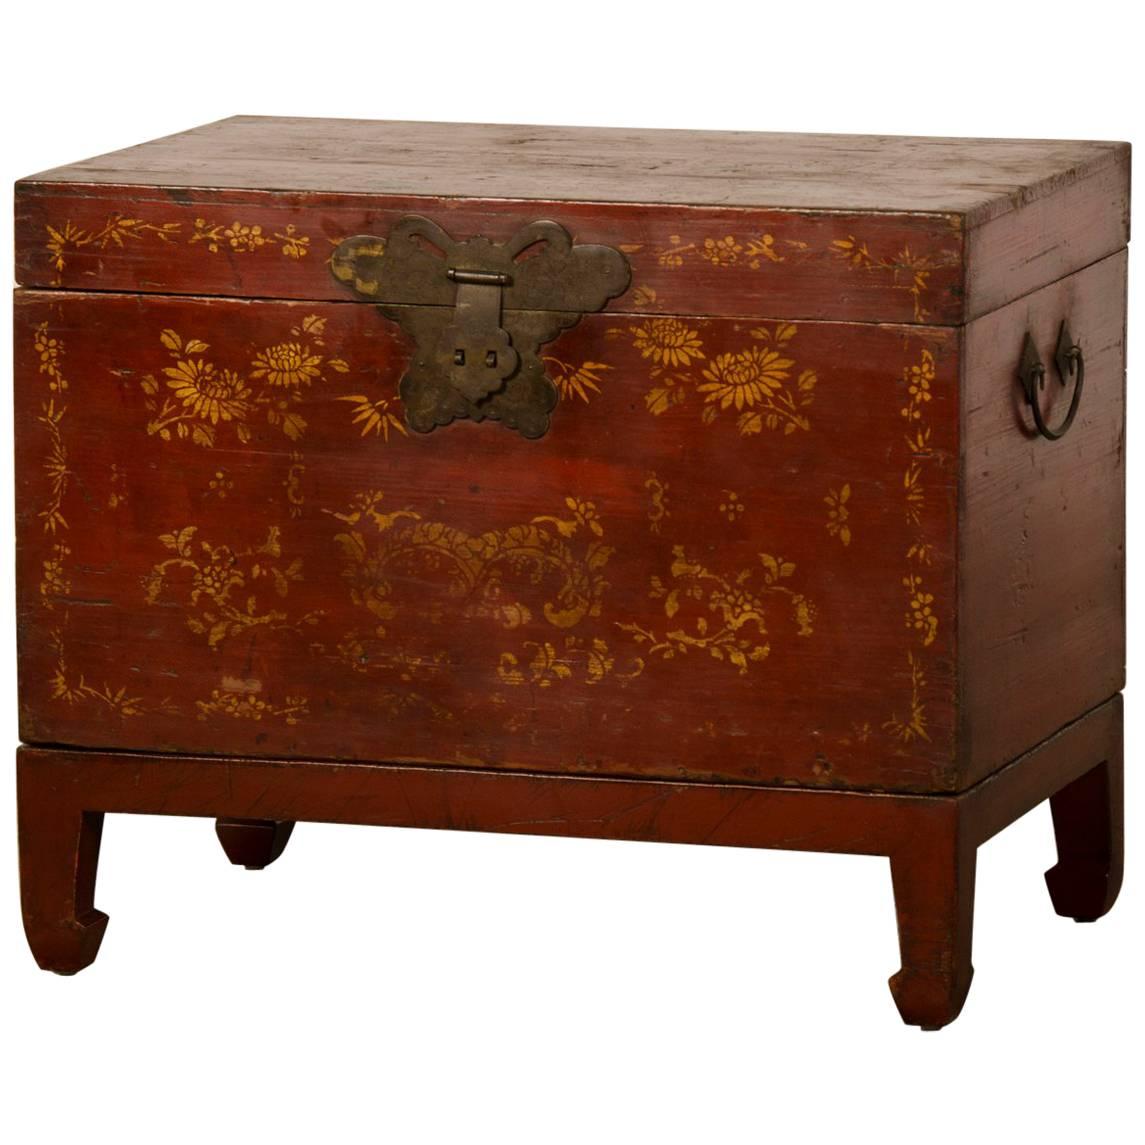 Antique Chinese Red Lacquer Trunk with Gold Decoration, circa 1875